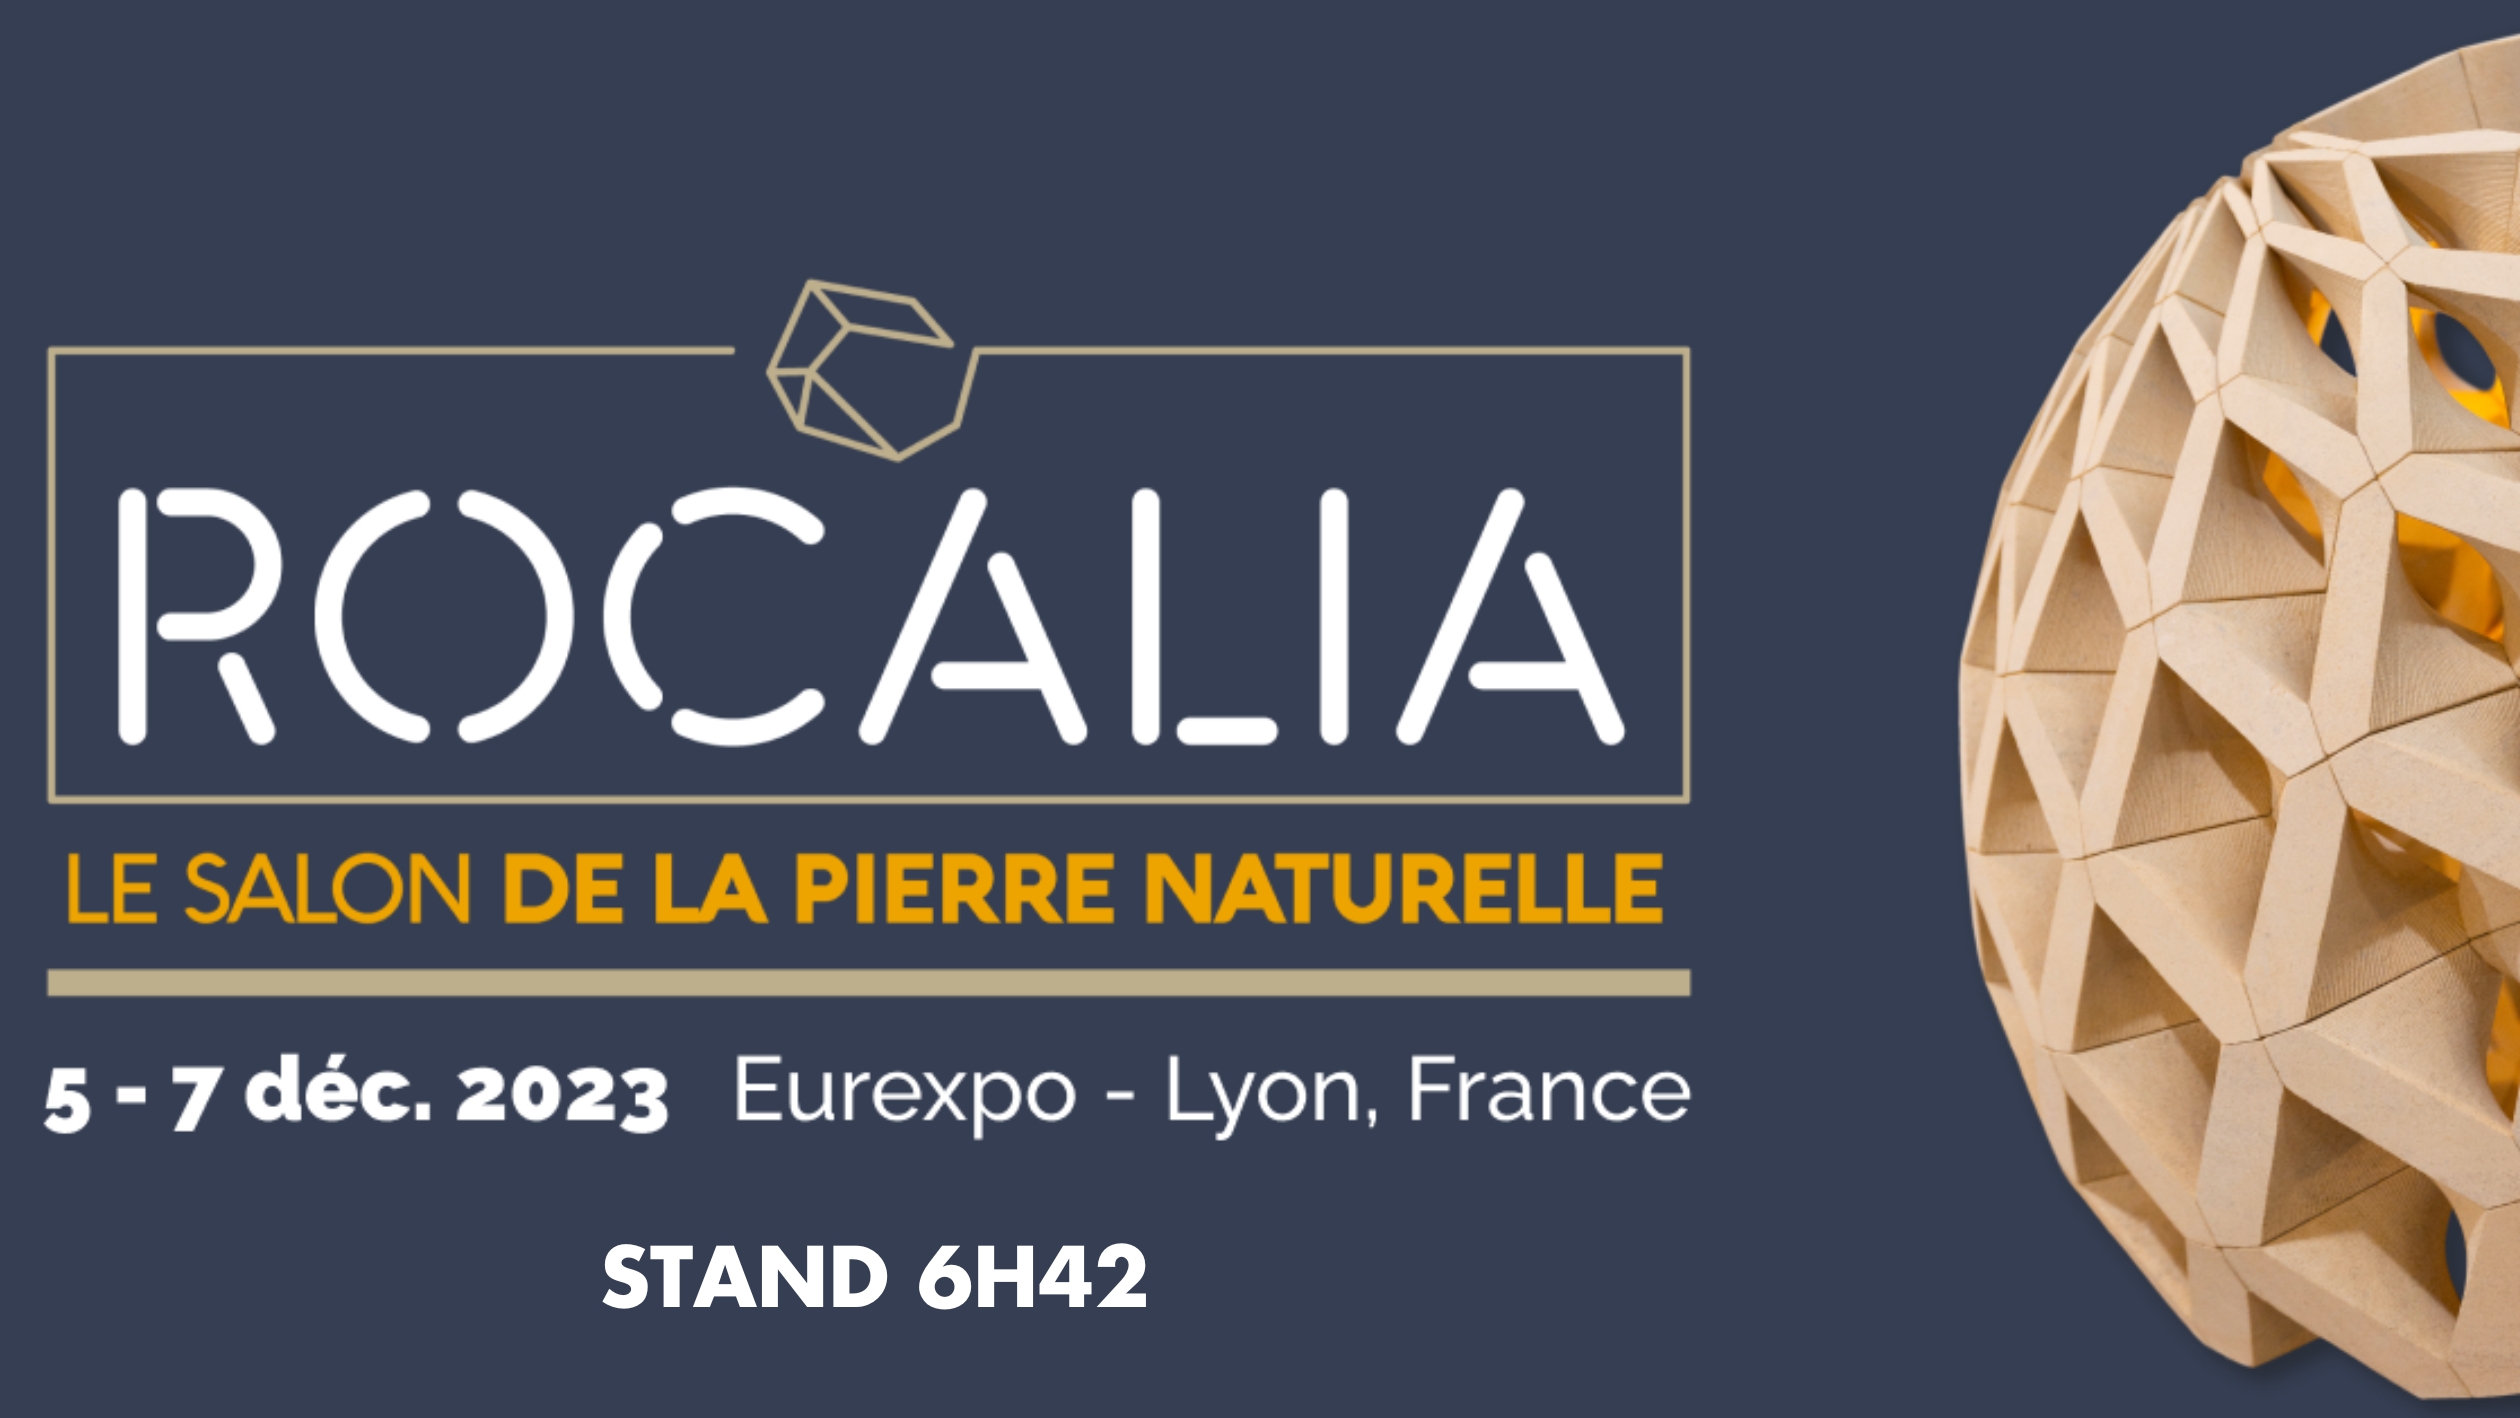 Thibaut’s Participation in the ROCALIA Natural Stone Exhibition, Lyon 2023